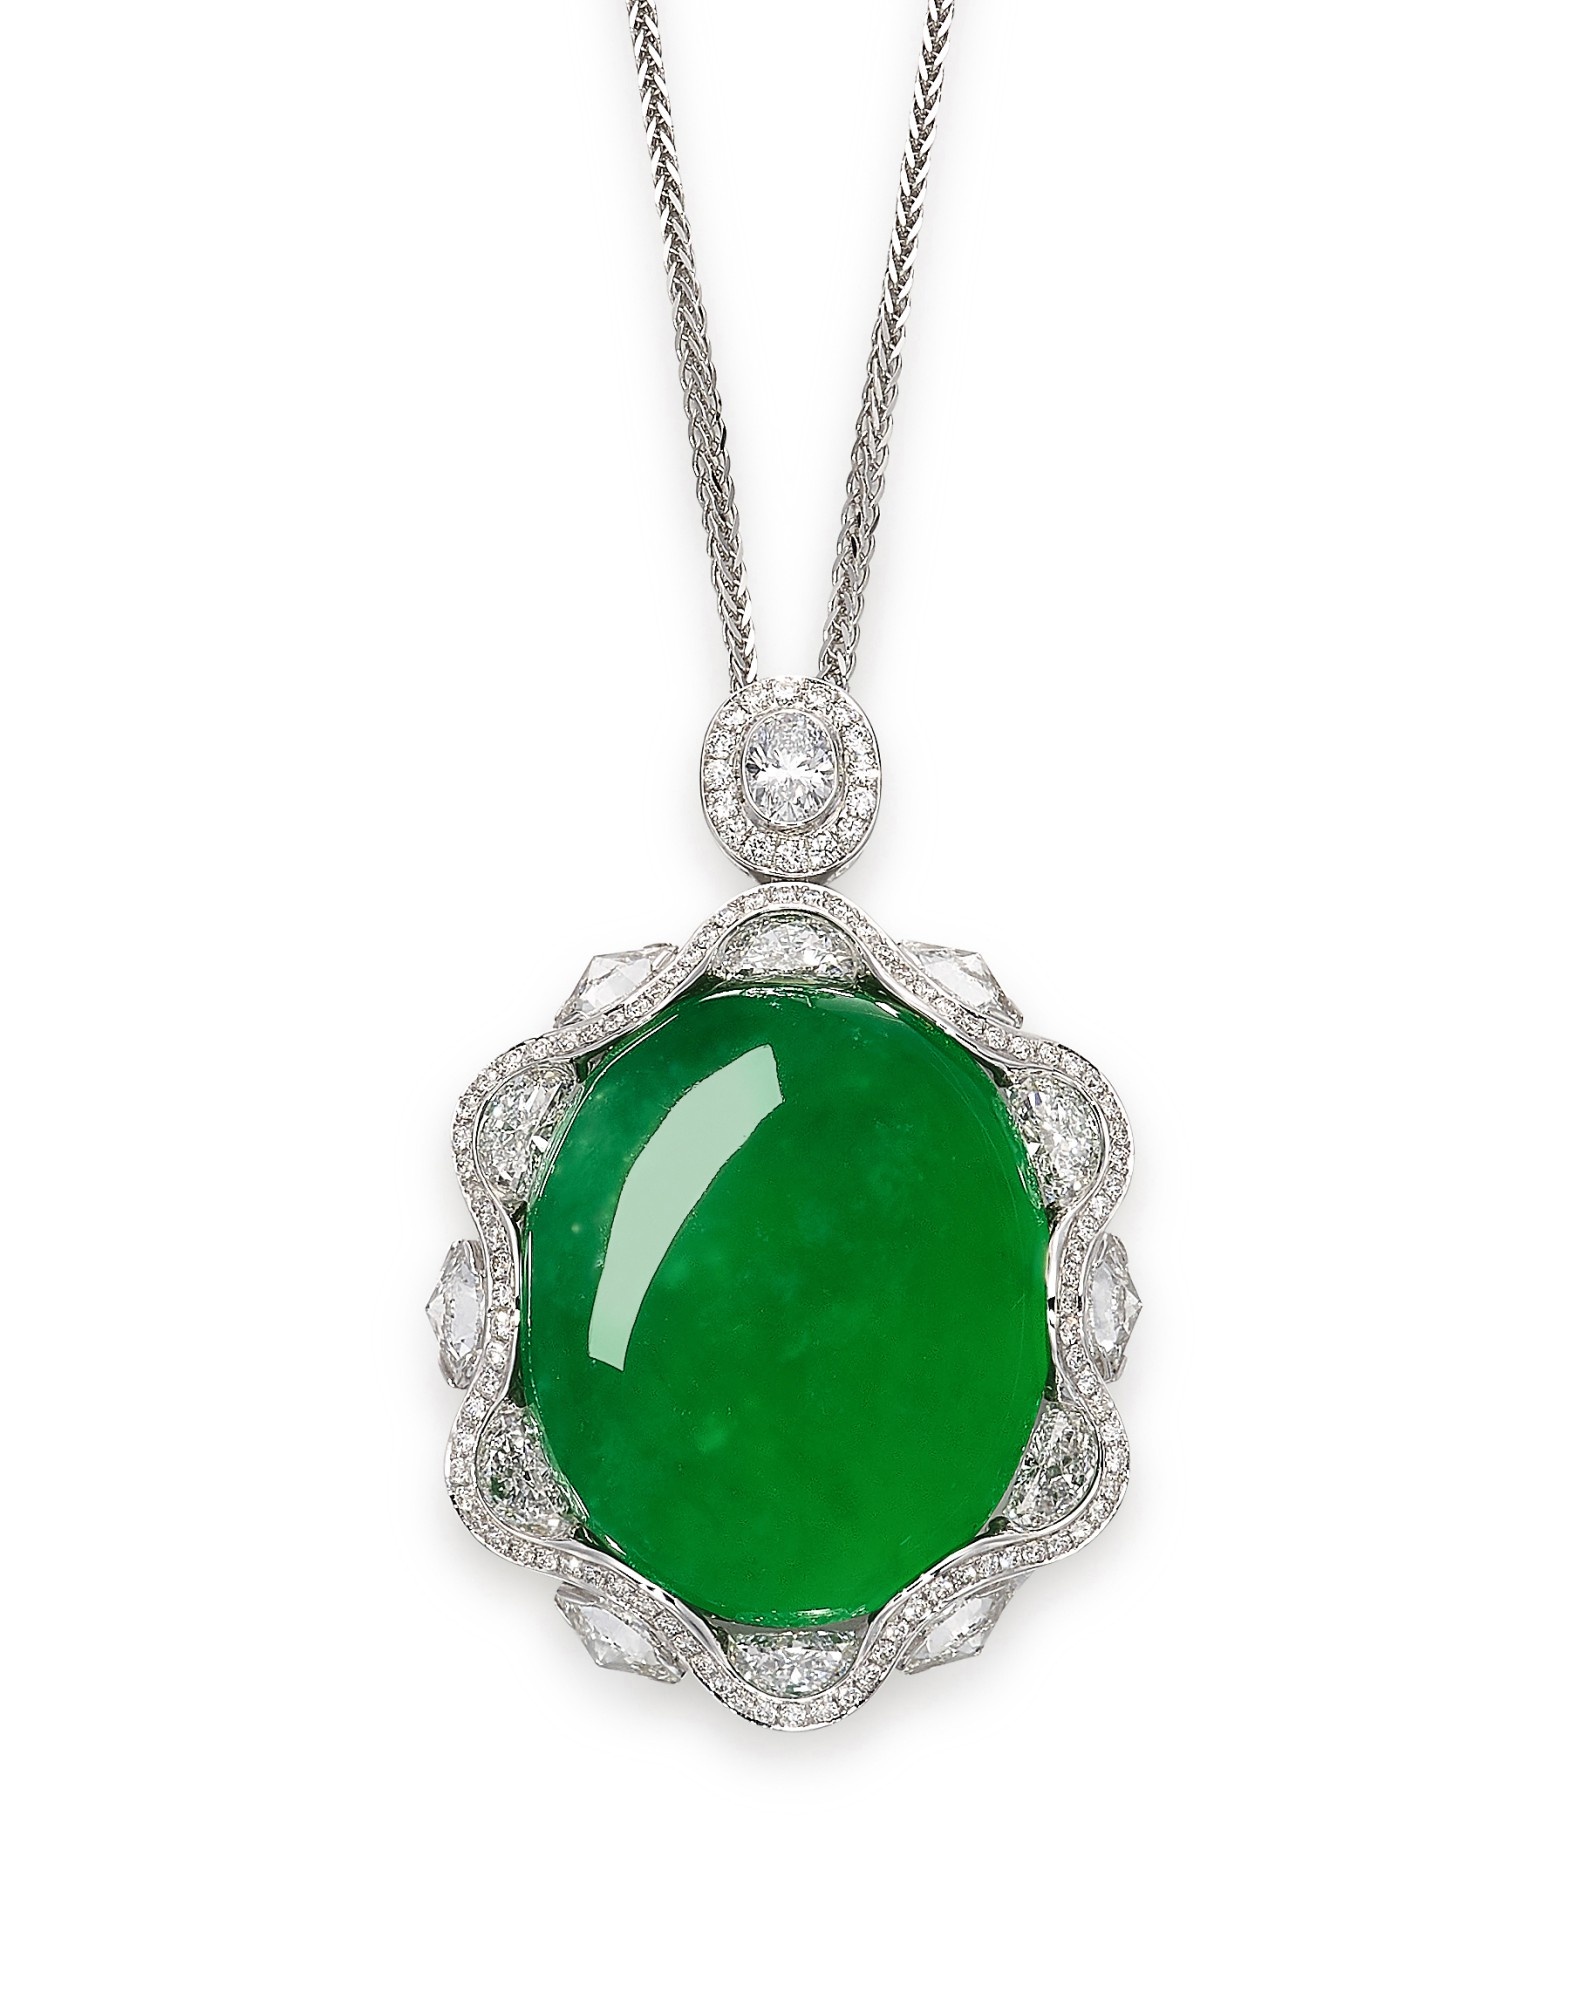 Jadeite Jewelry: A Collector's Guide | Jewelry | Sotheby's 1590x2000